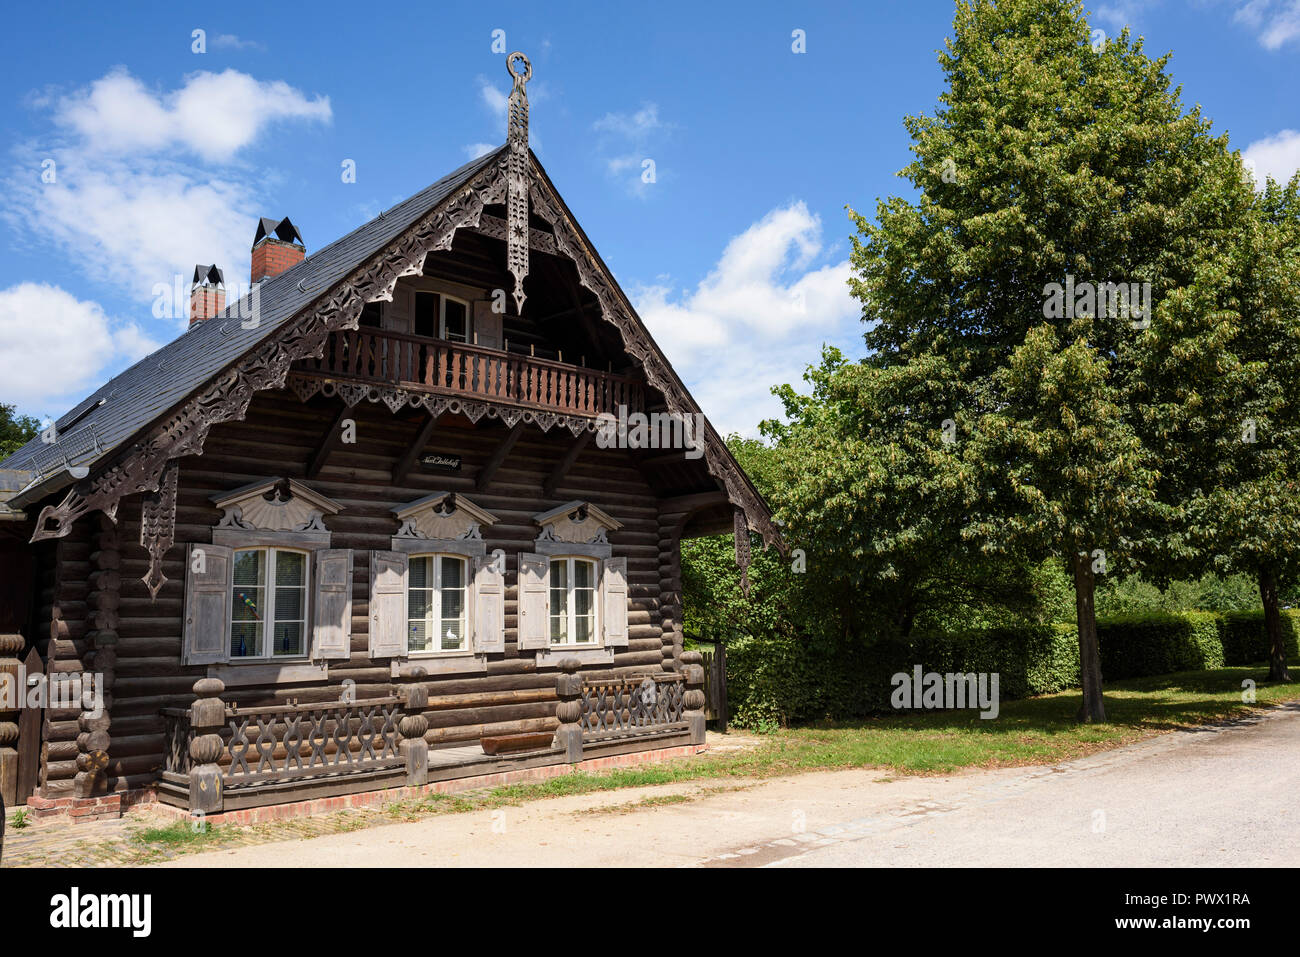 Potsdam. Berlin. Germany. Traditional Russian timber house in the settlement of Alexandrowka, a 19th century Russian colony in Potsdam. Stock Photo